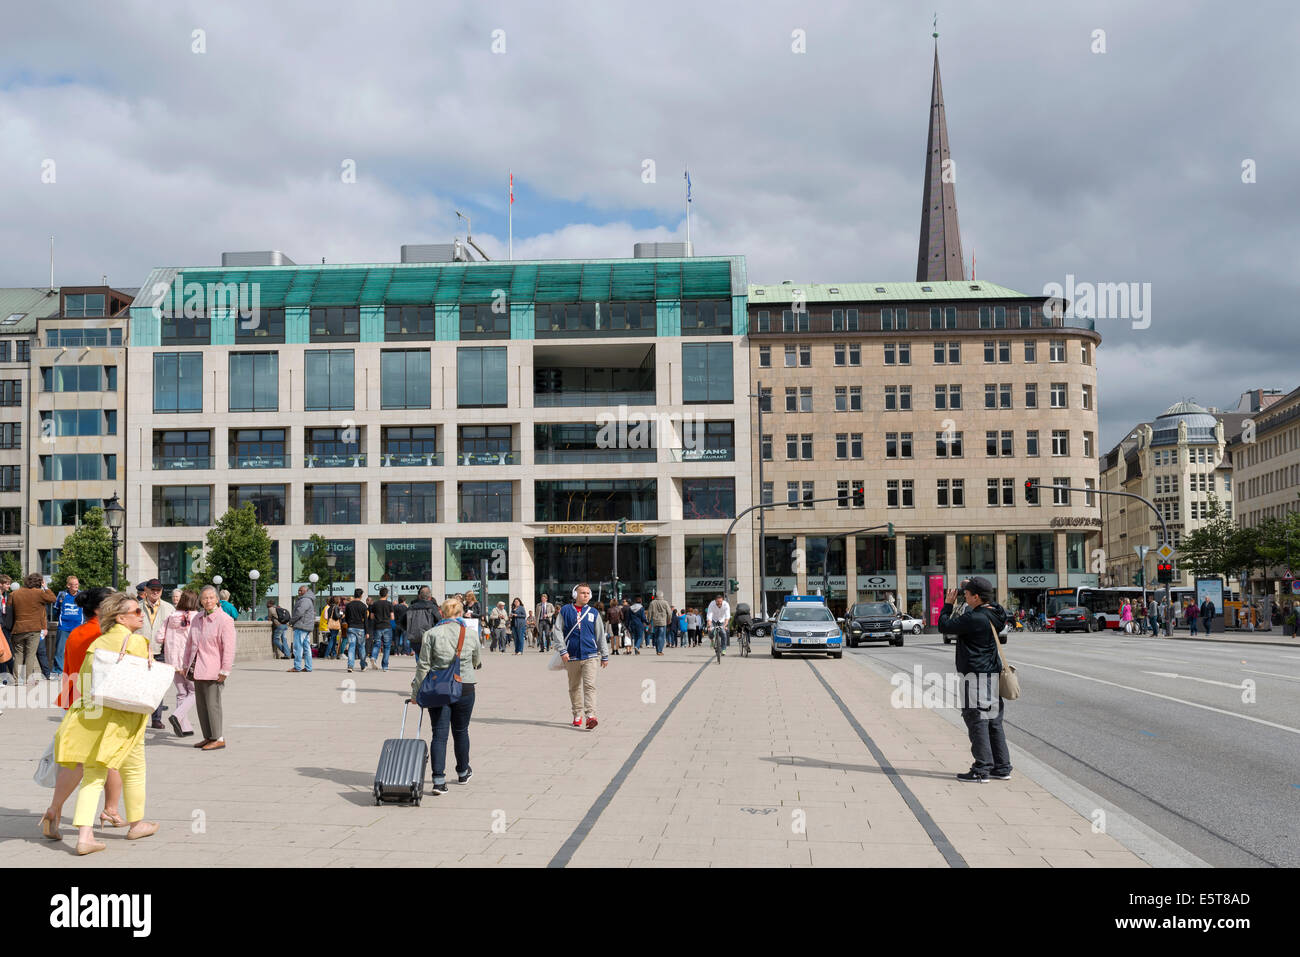 Europa Passage Hamburg High Resolution Stock Photography and Images - Alamy